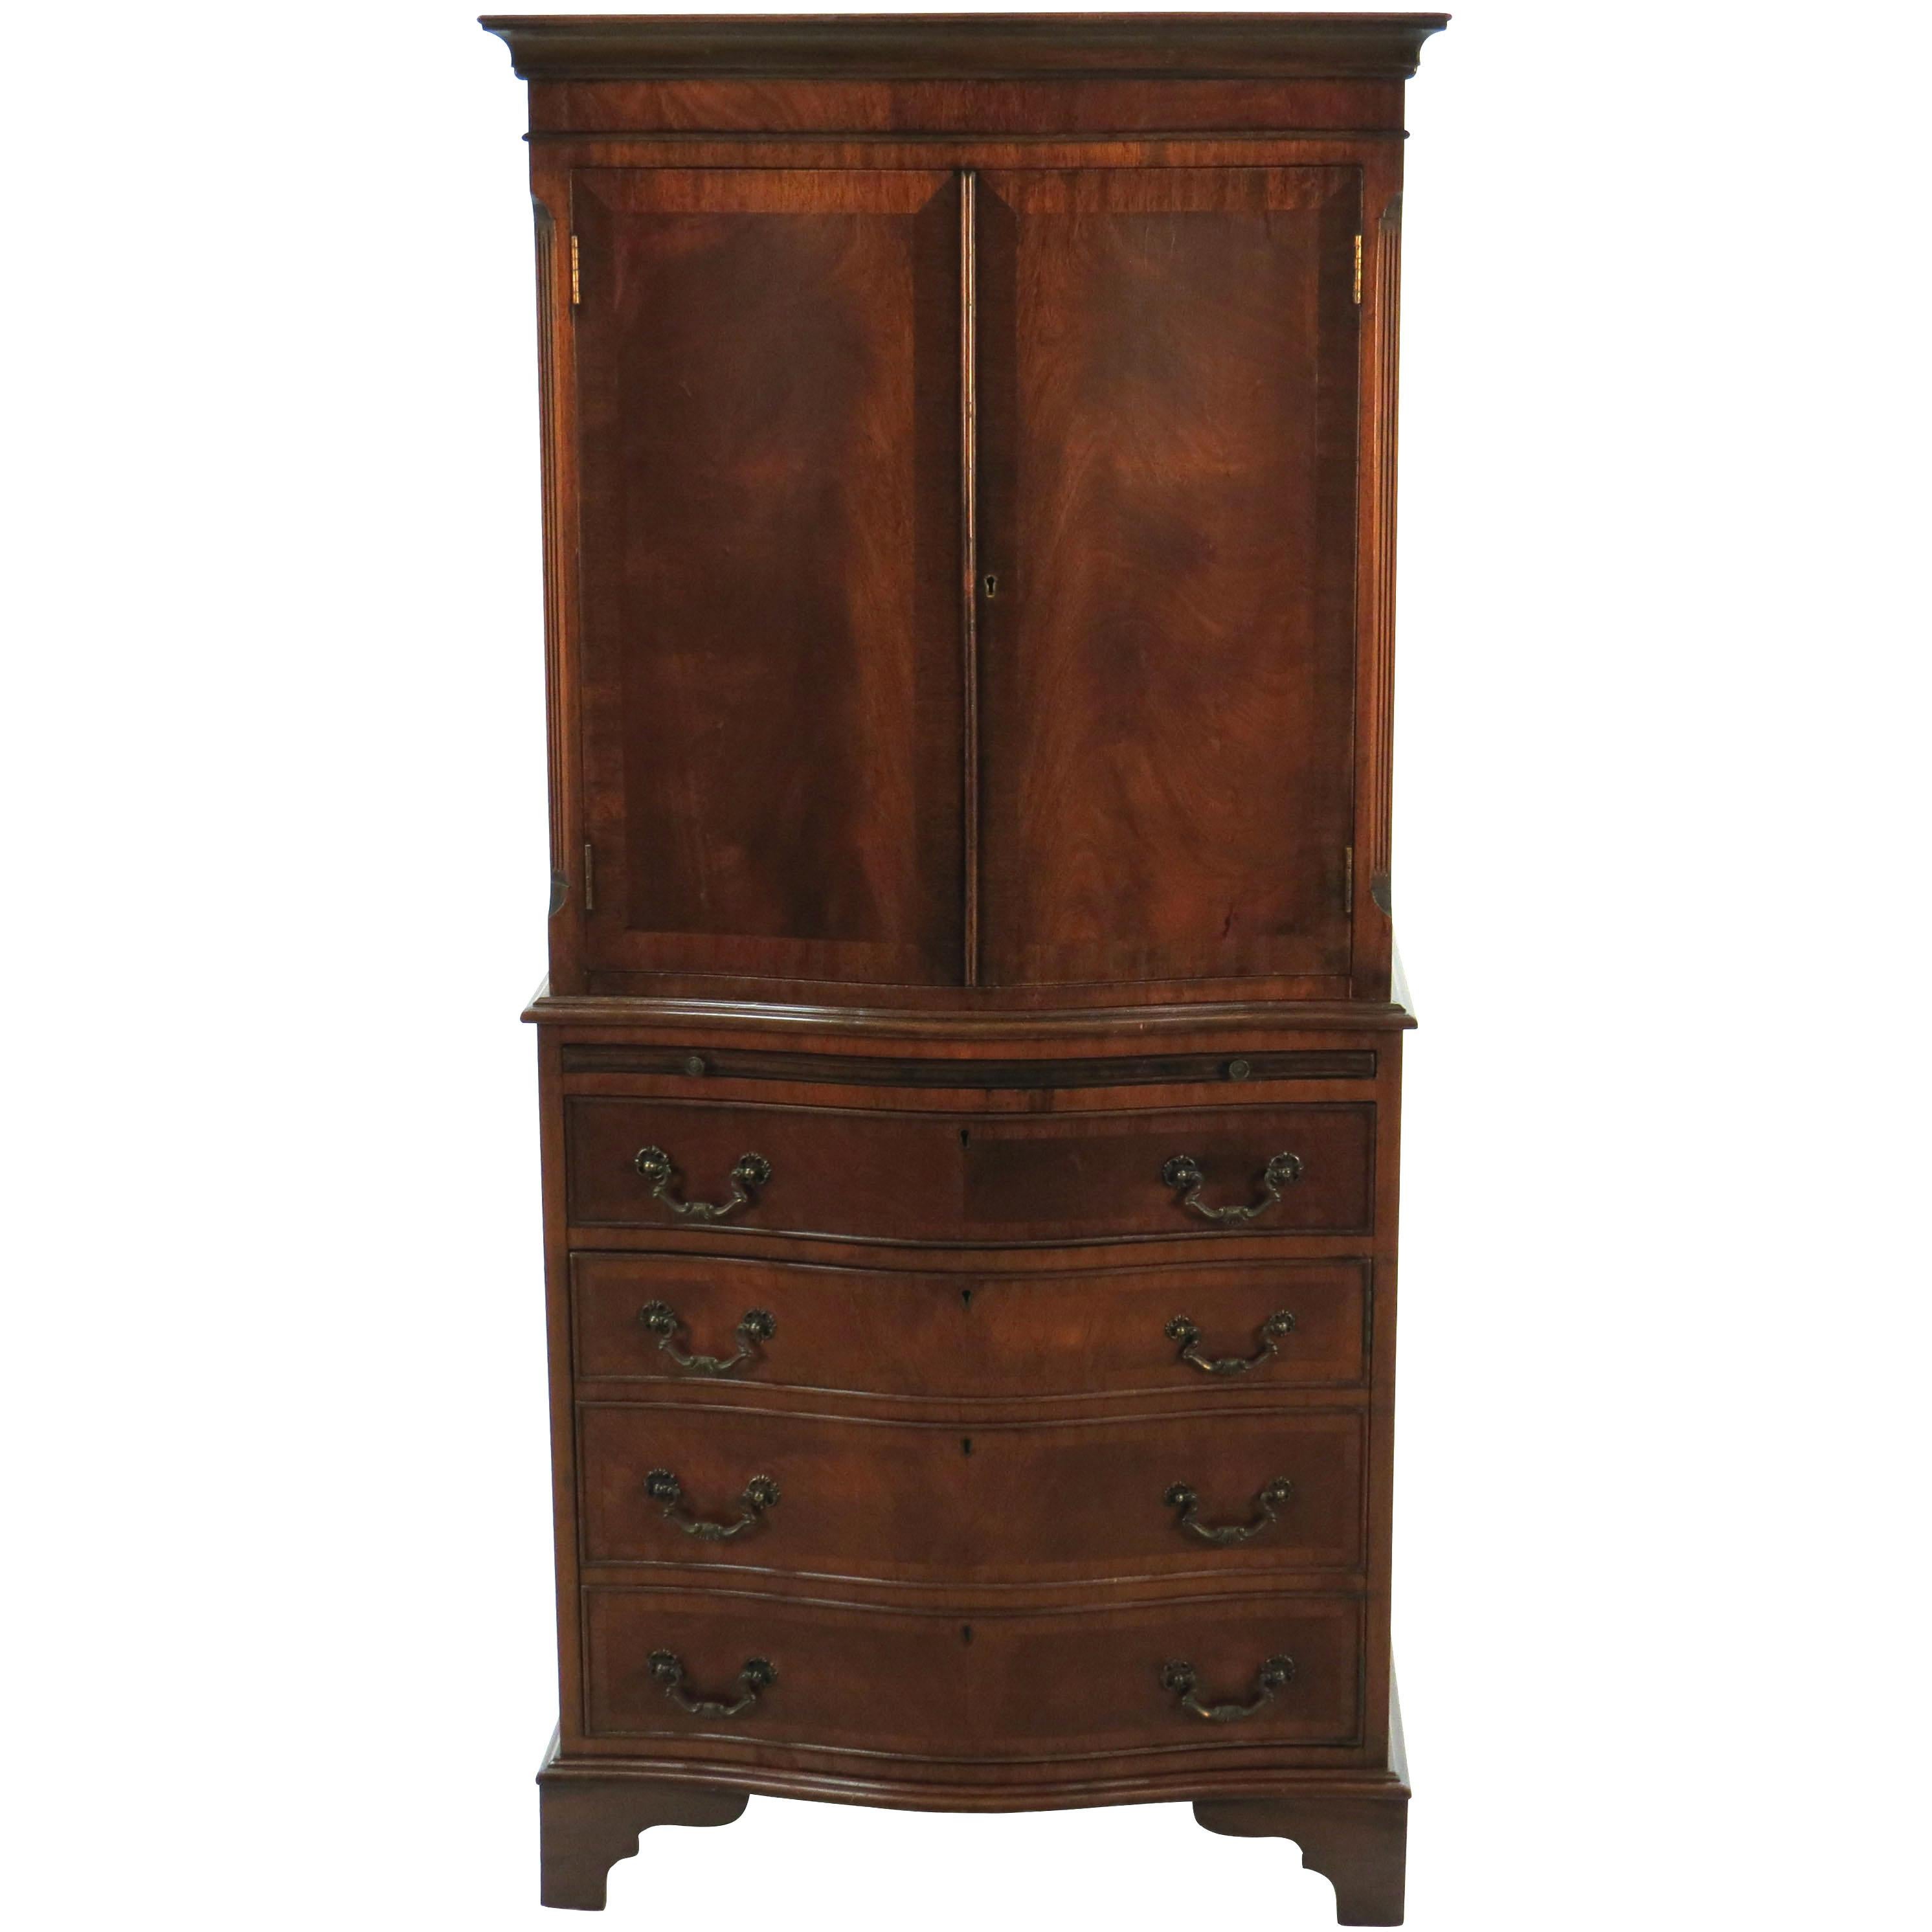 English Mahogany Bow Fronted Liquor Cabinet Cocktail Bar Drinks Cupboard For Sale